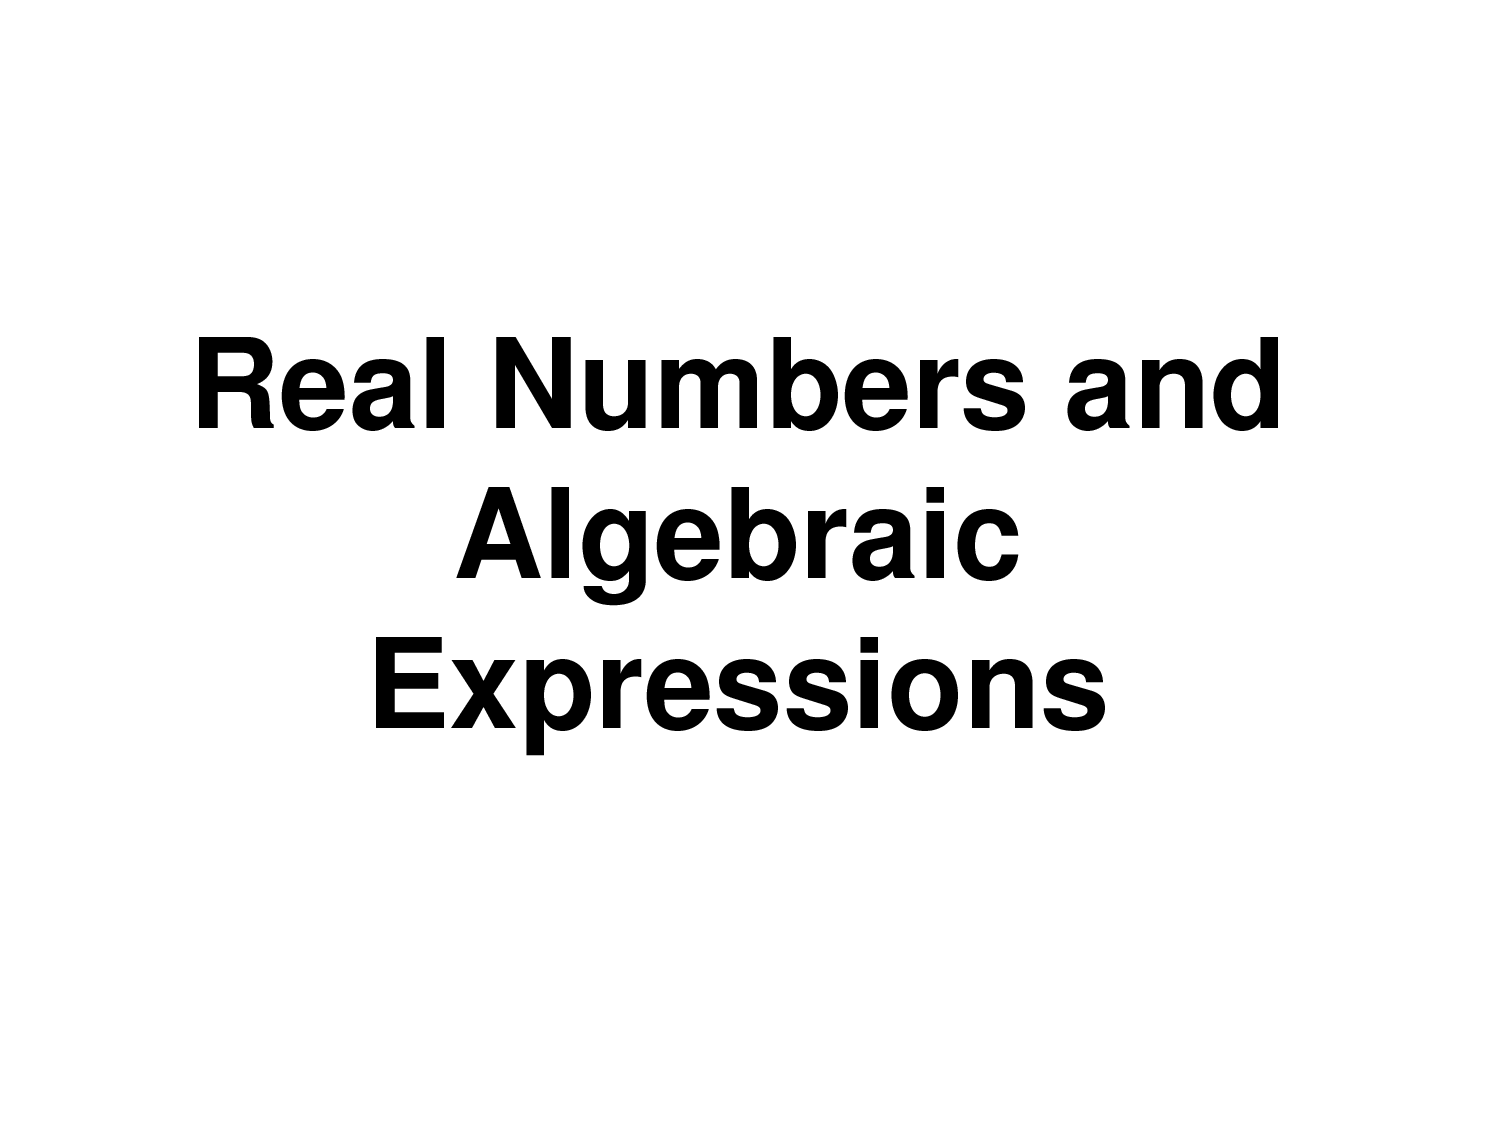 8-best-images-of-subsets-of-real-numbers-worksheet-real-number-system-chart-properties-of